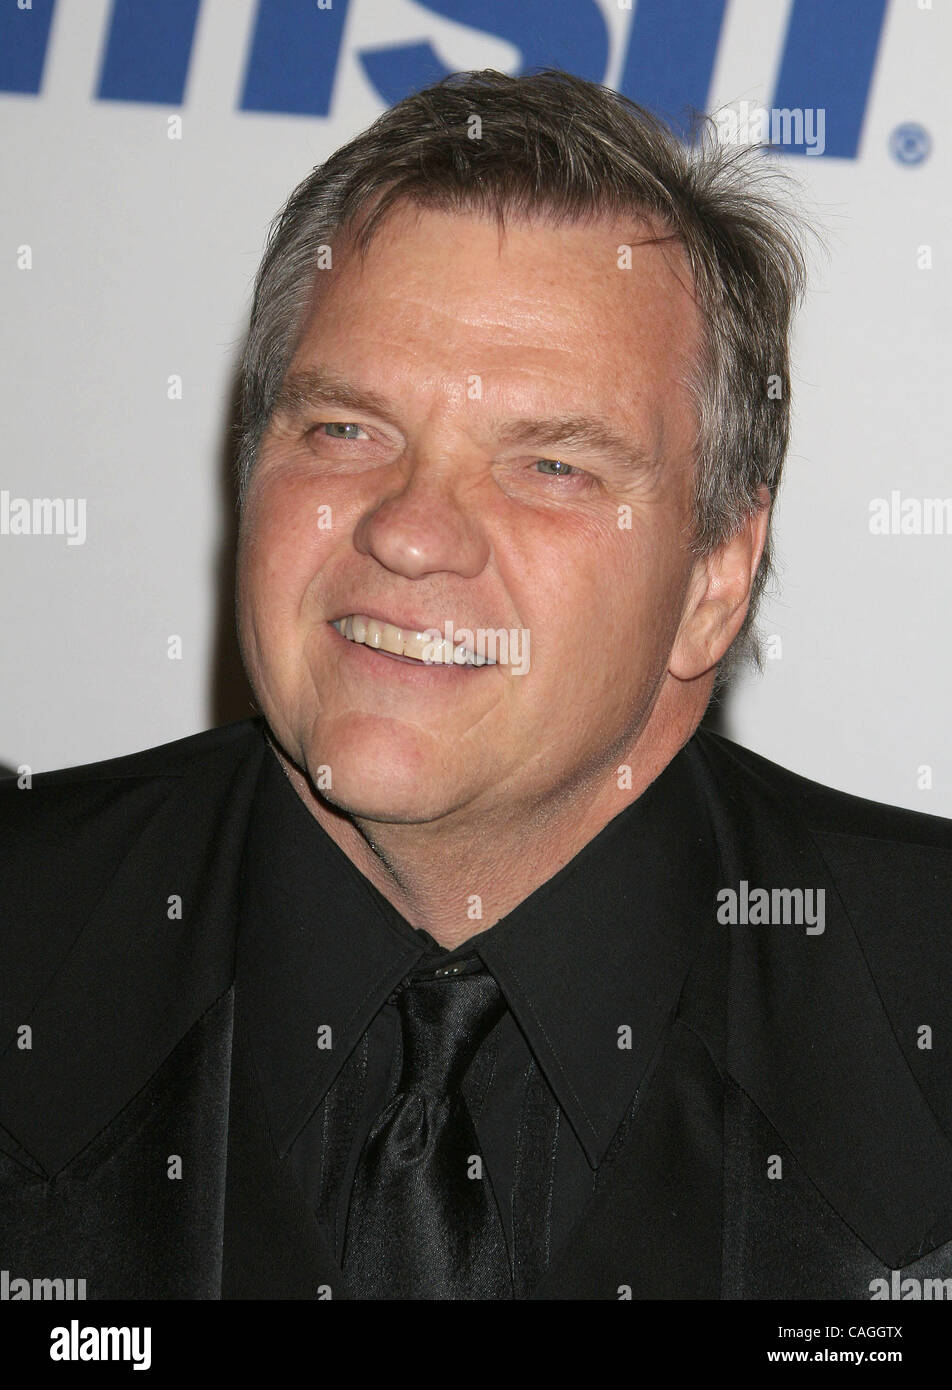 Feb 09, 2008; Hollywood, CA, USA;  Singer/Actor MEATLOAF at the Clive Davis Pre-Grammy Party 2008 held at the Beverly Hilton Hotel. Mandatory Credit: Photo by Paul Fenton/ZUMA Press. (©) Copyright 2008 by Paul Fenton Stock Photo